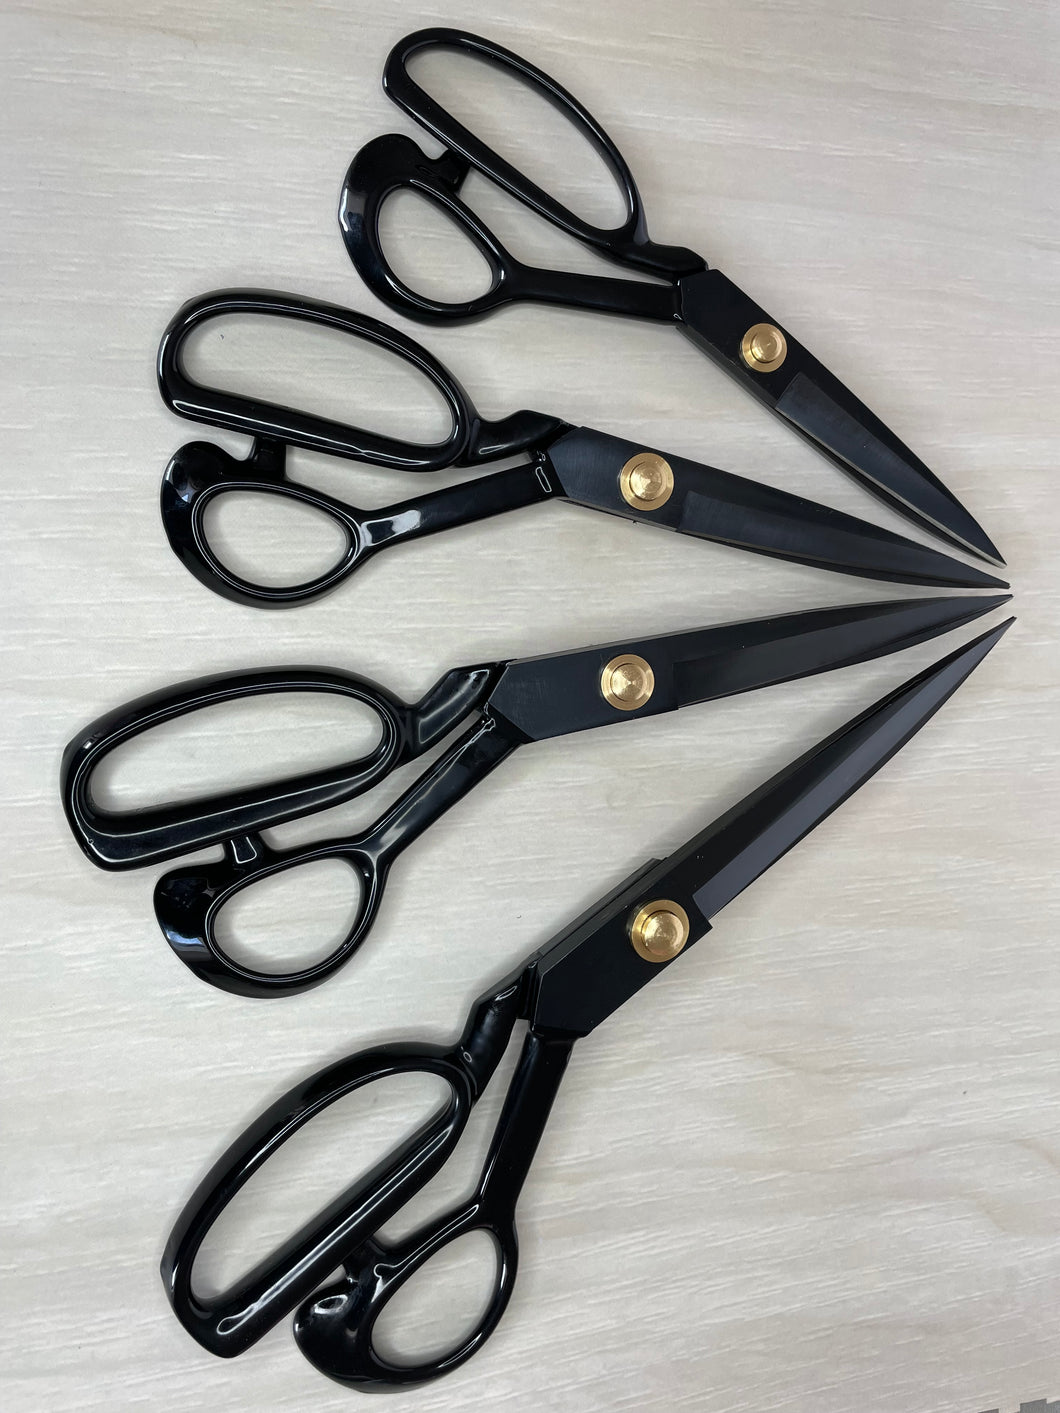 12 Inch Tailor's Shears